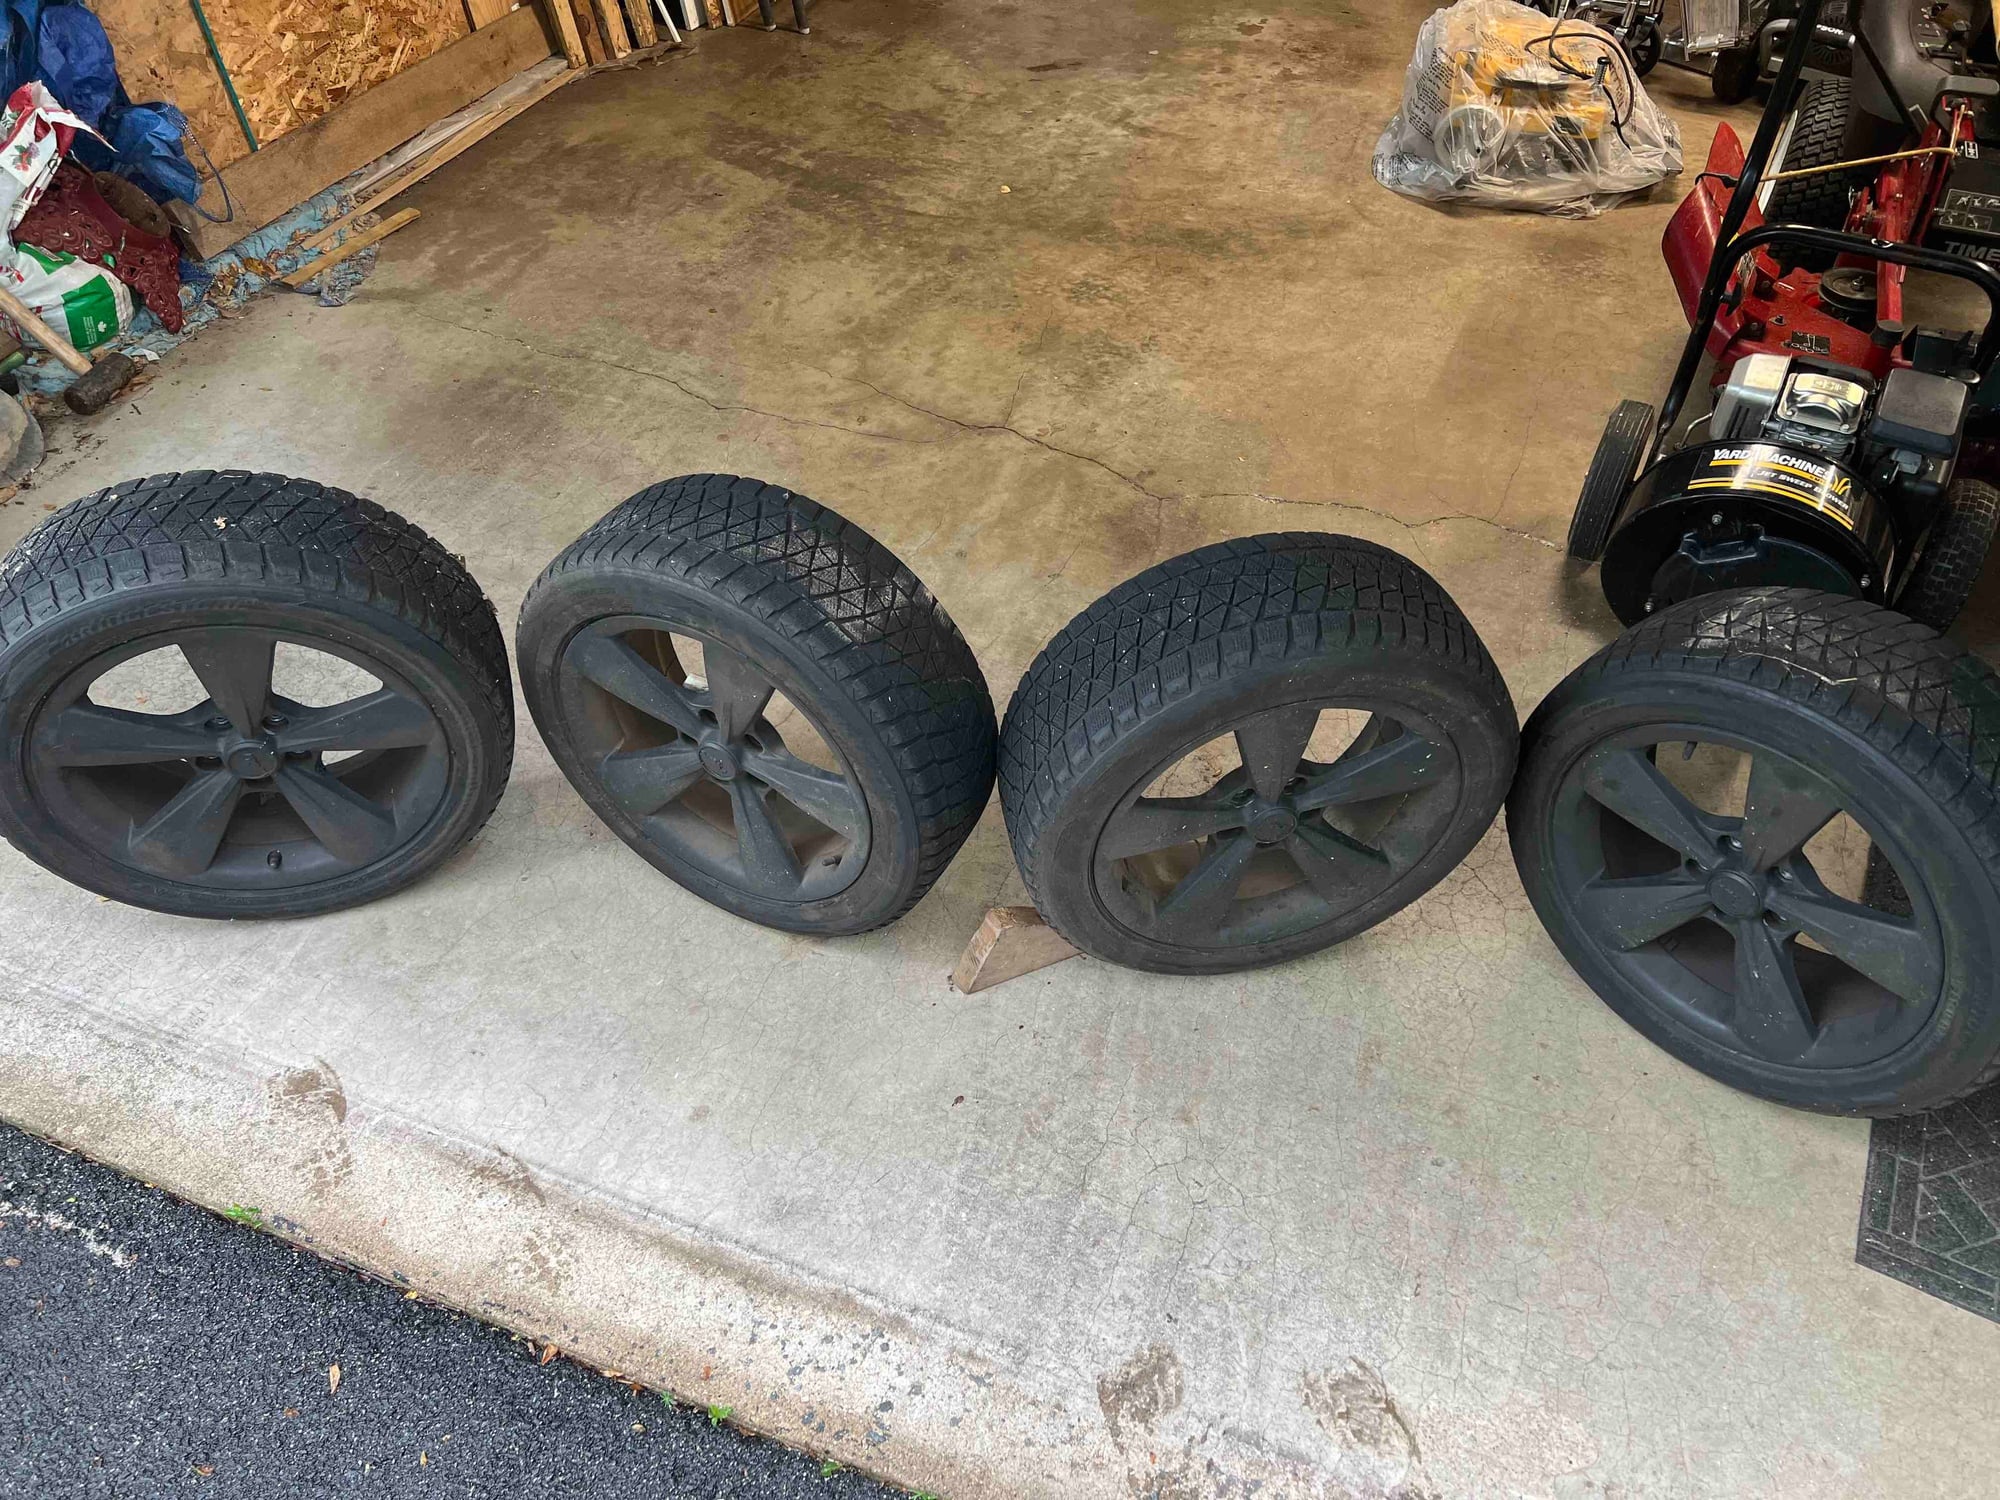 Wheels and Tires/Axles - Used - 4 OEM wheels with snow tires mounted and balanced - Used - 2013 to 2014 Ford Mustang - Dc Metro, VA 22206, United States